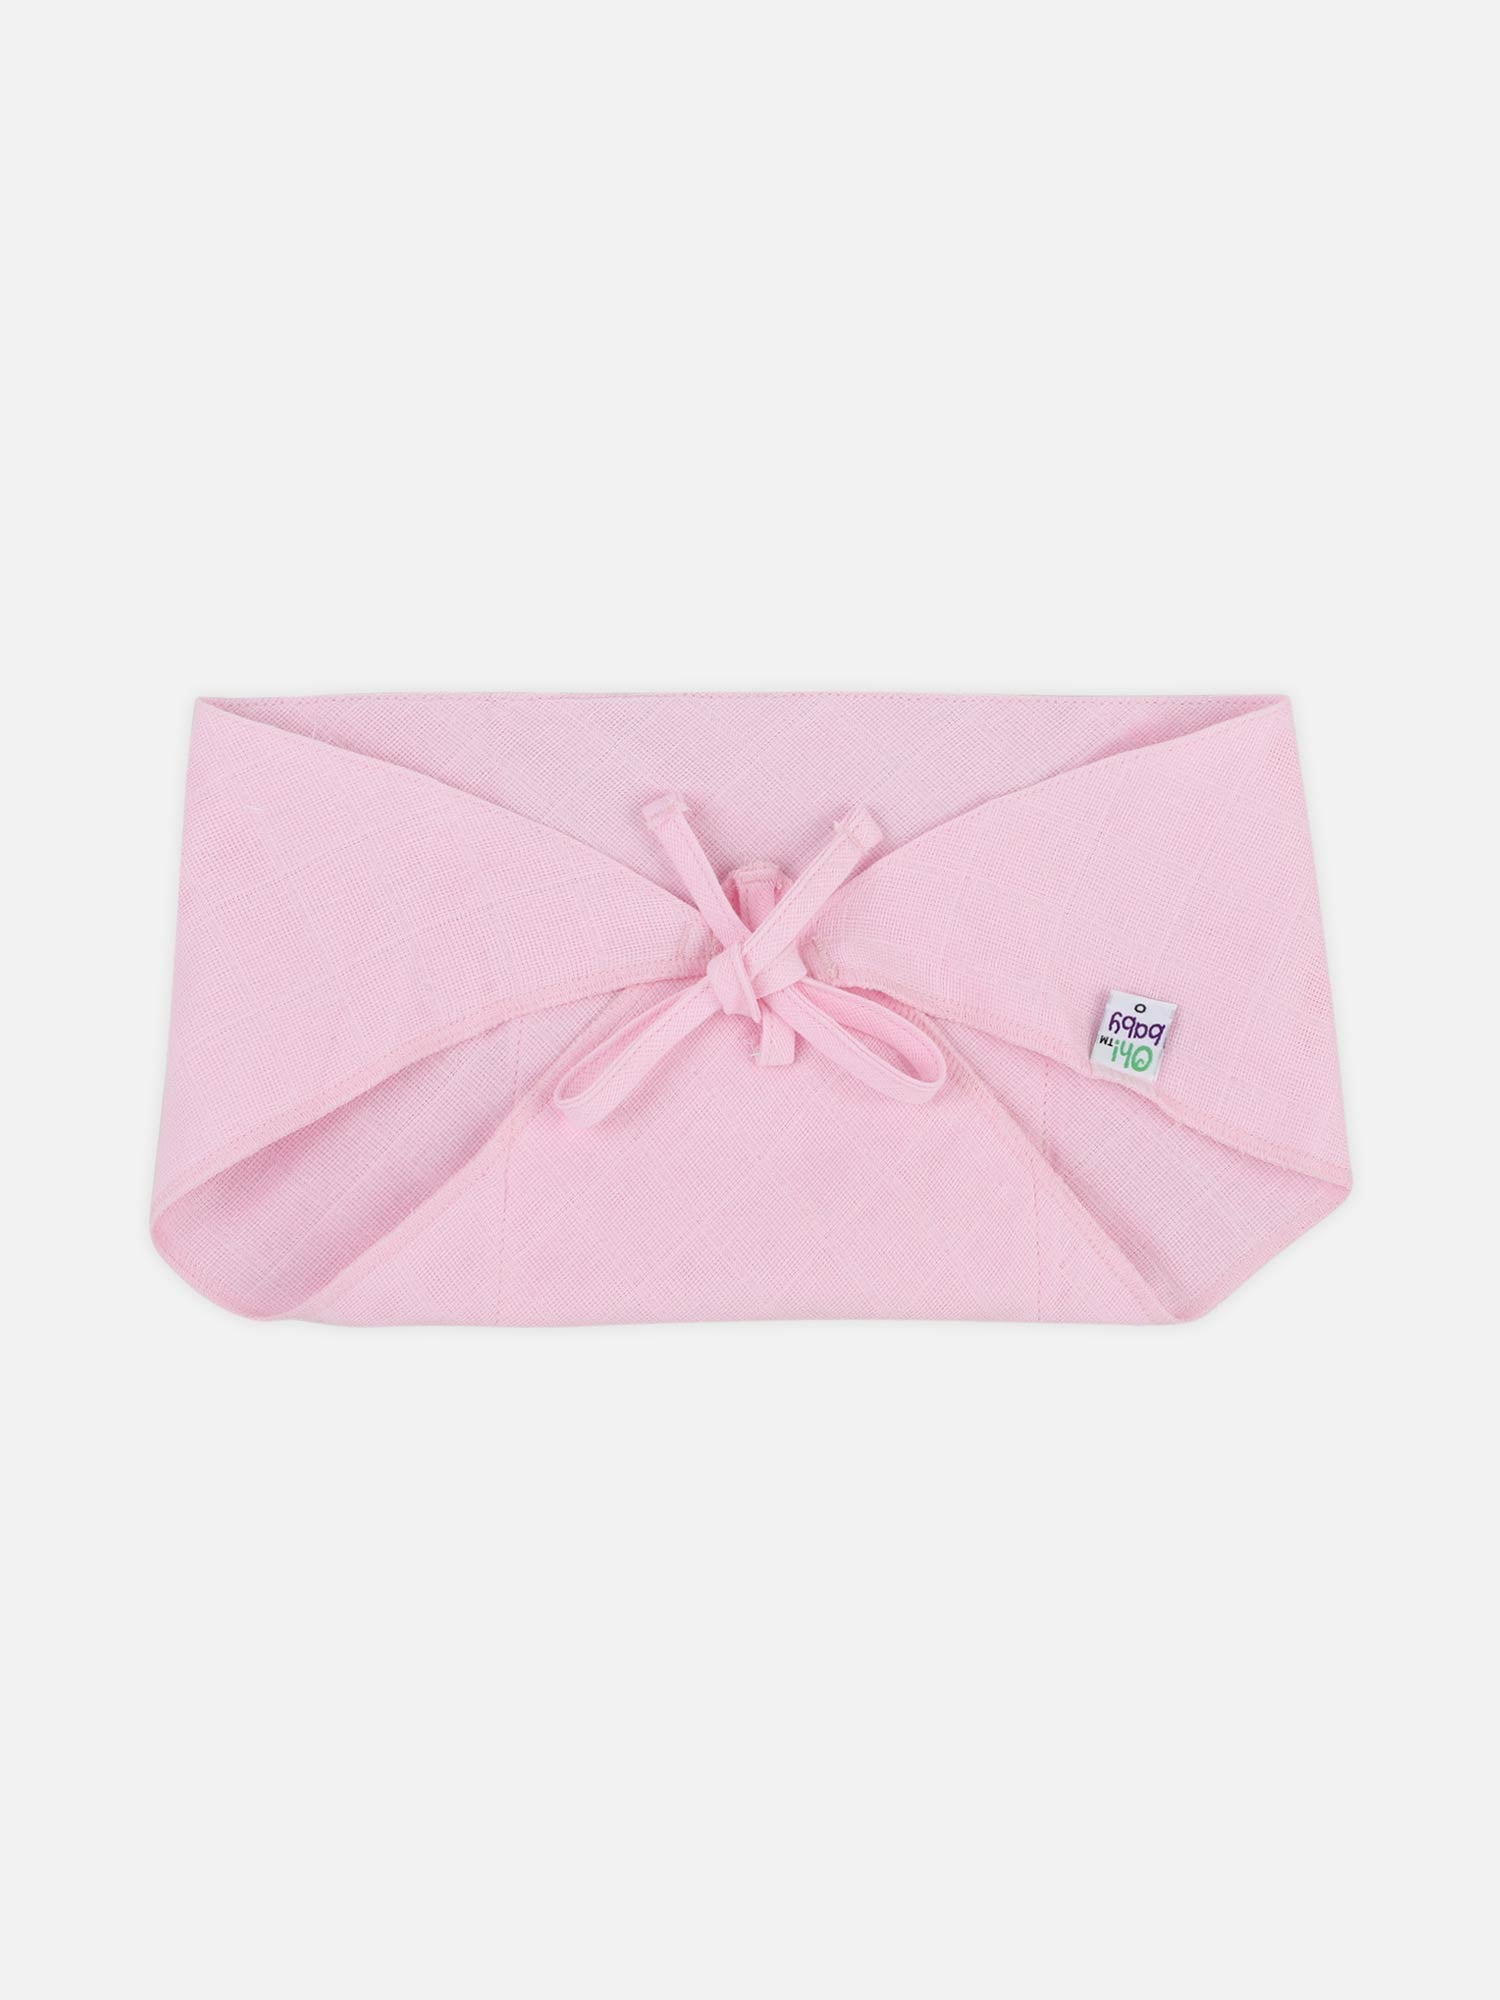 Oh Baby Plain Triangle Nappies Pink - Trpl